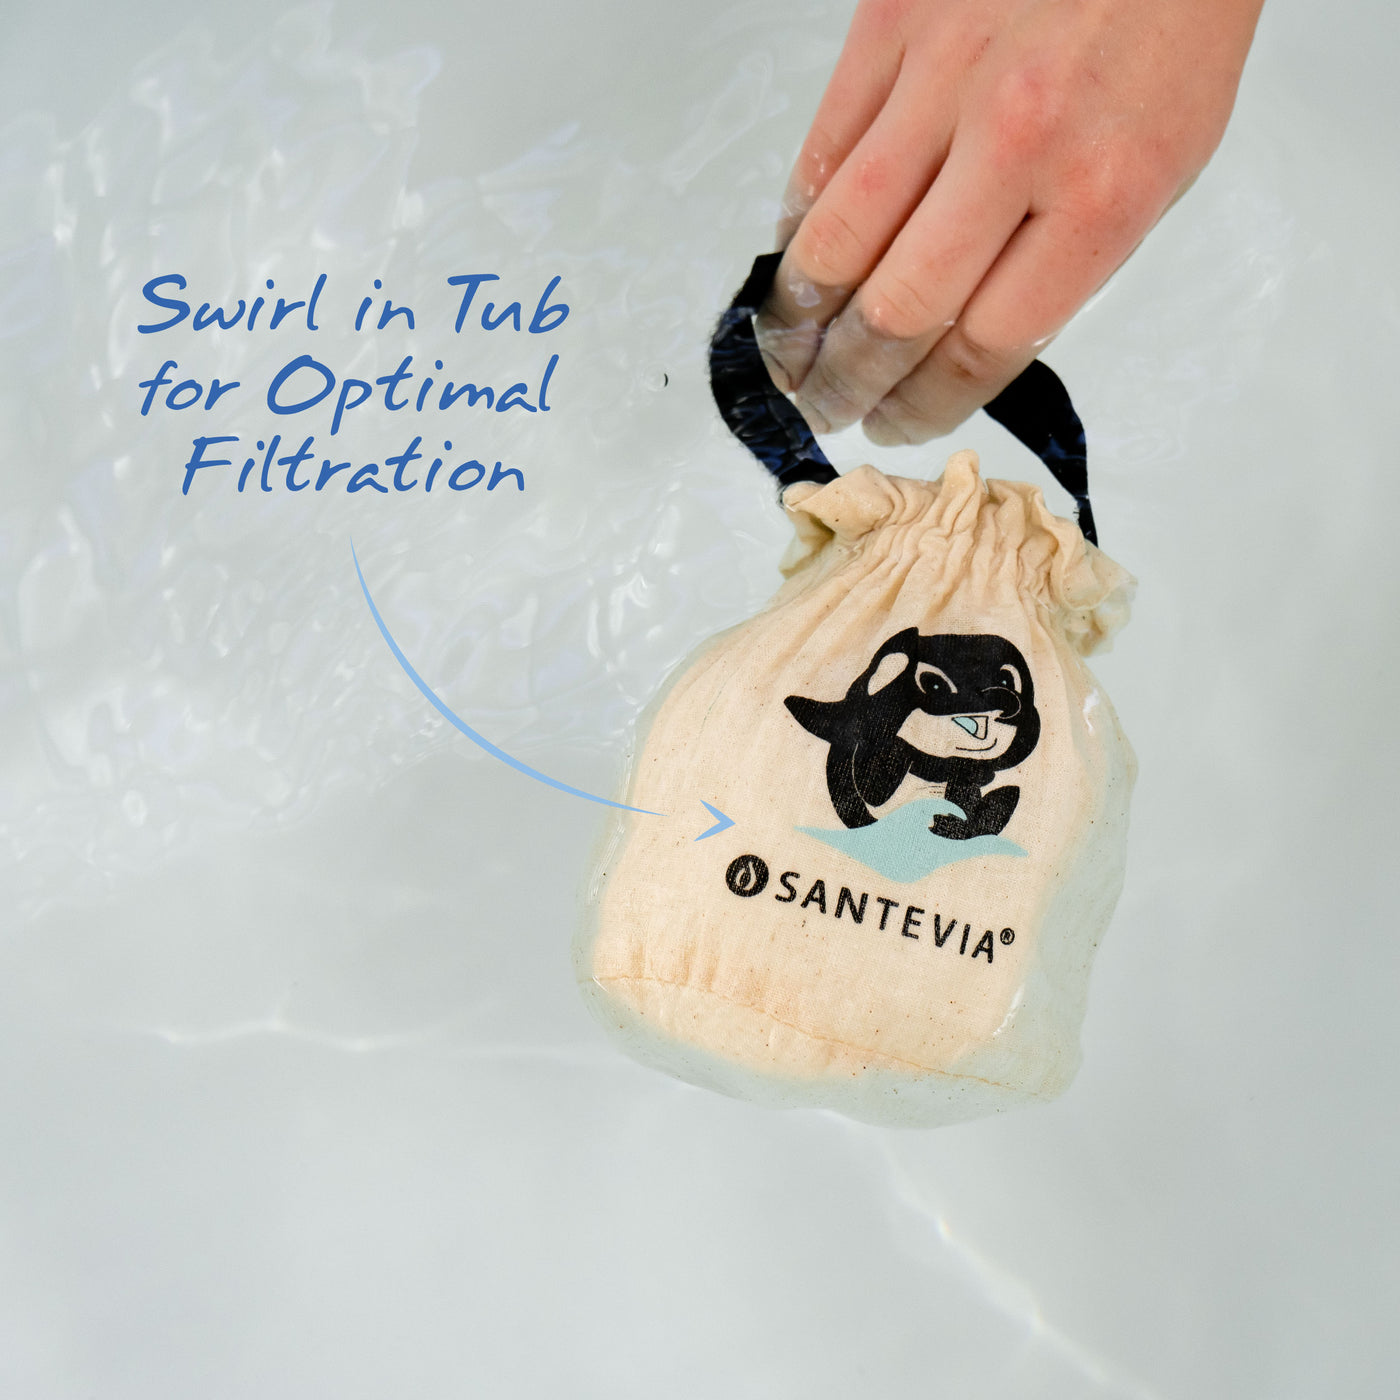 Swirl the Santevia Bath Filter in tub for optimal filtration